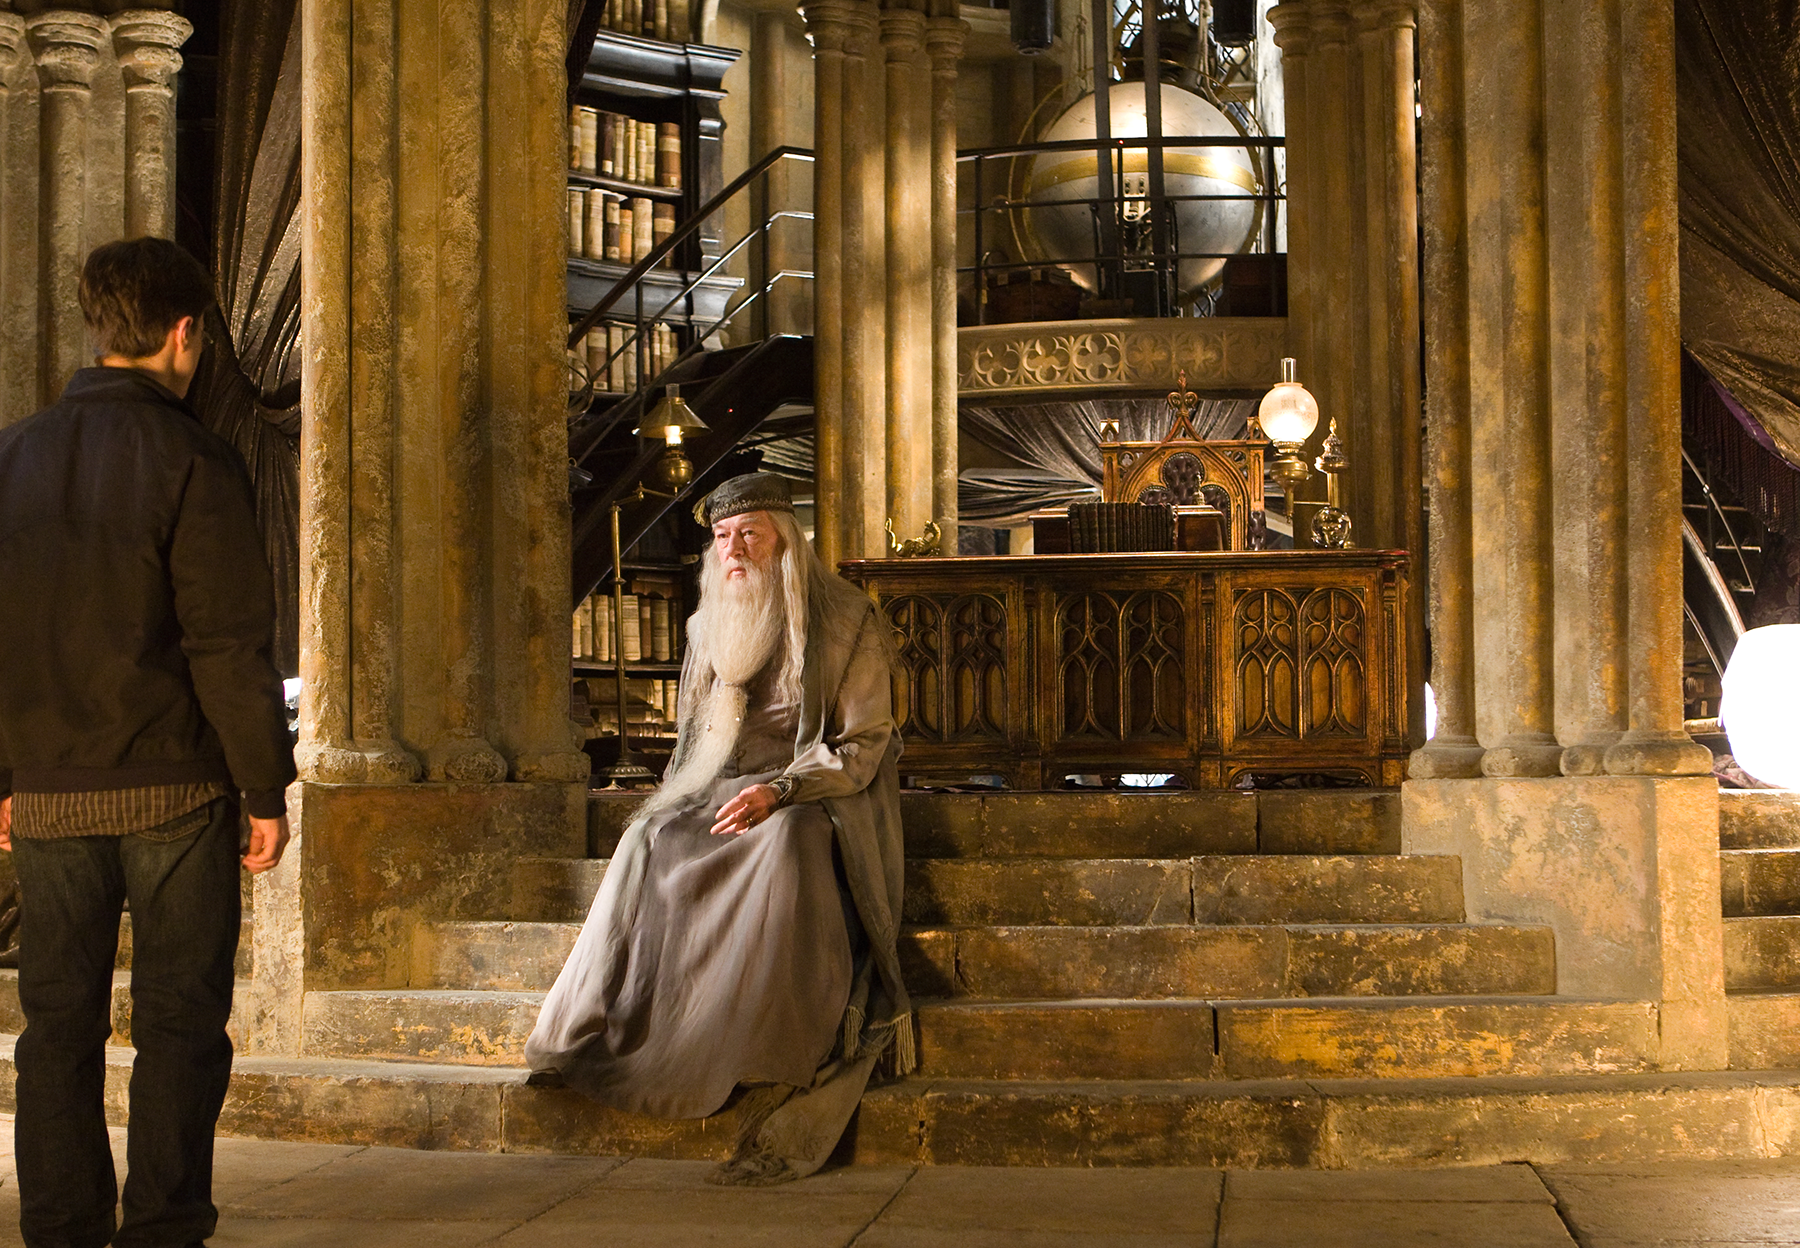 The Wizarding World of Harry Potter: Dumbledore's Office